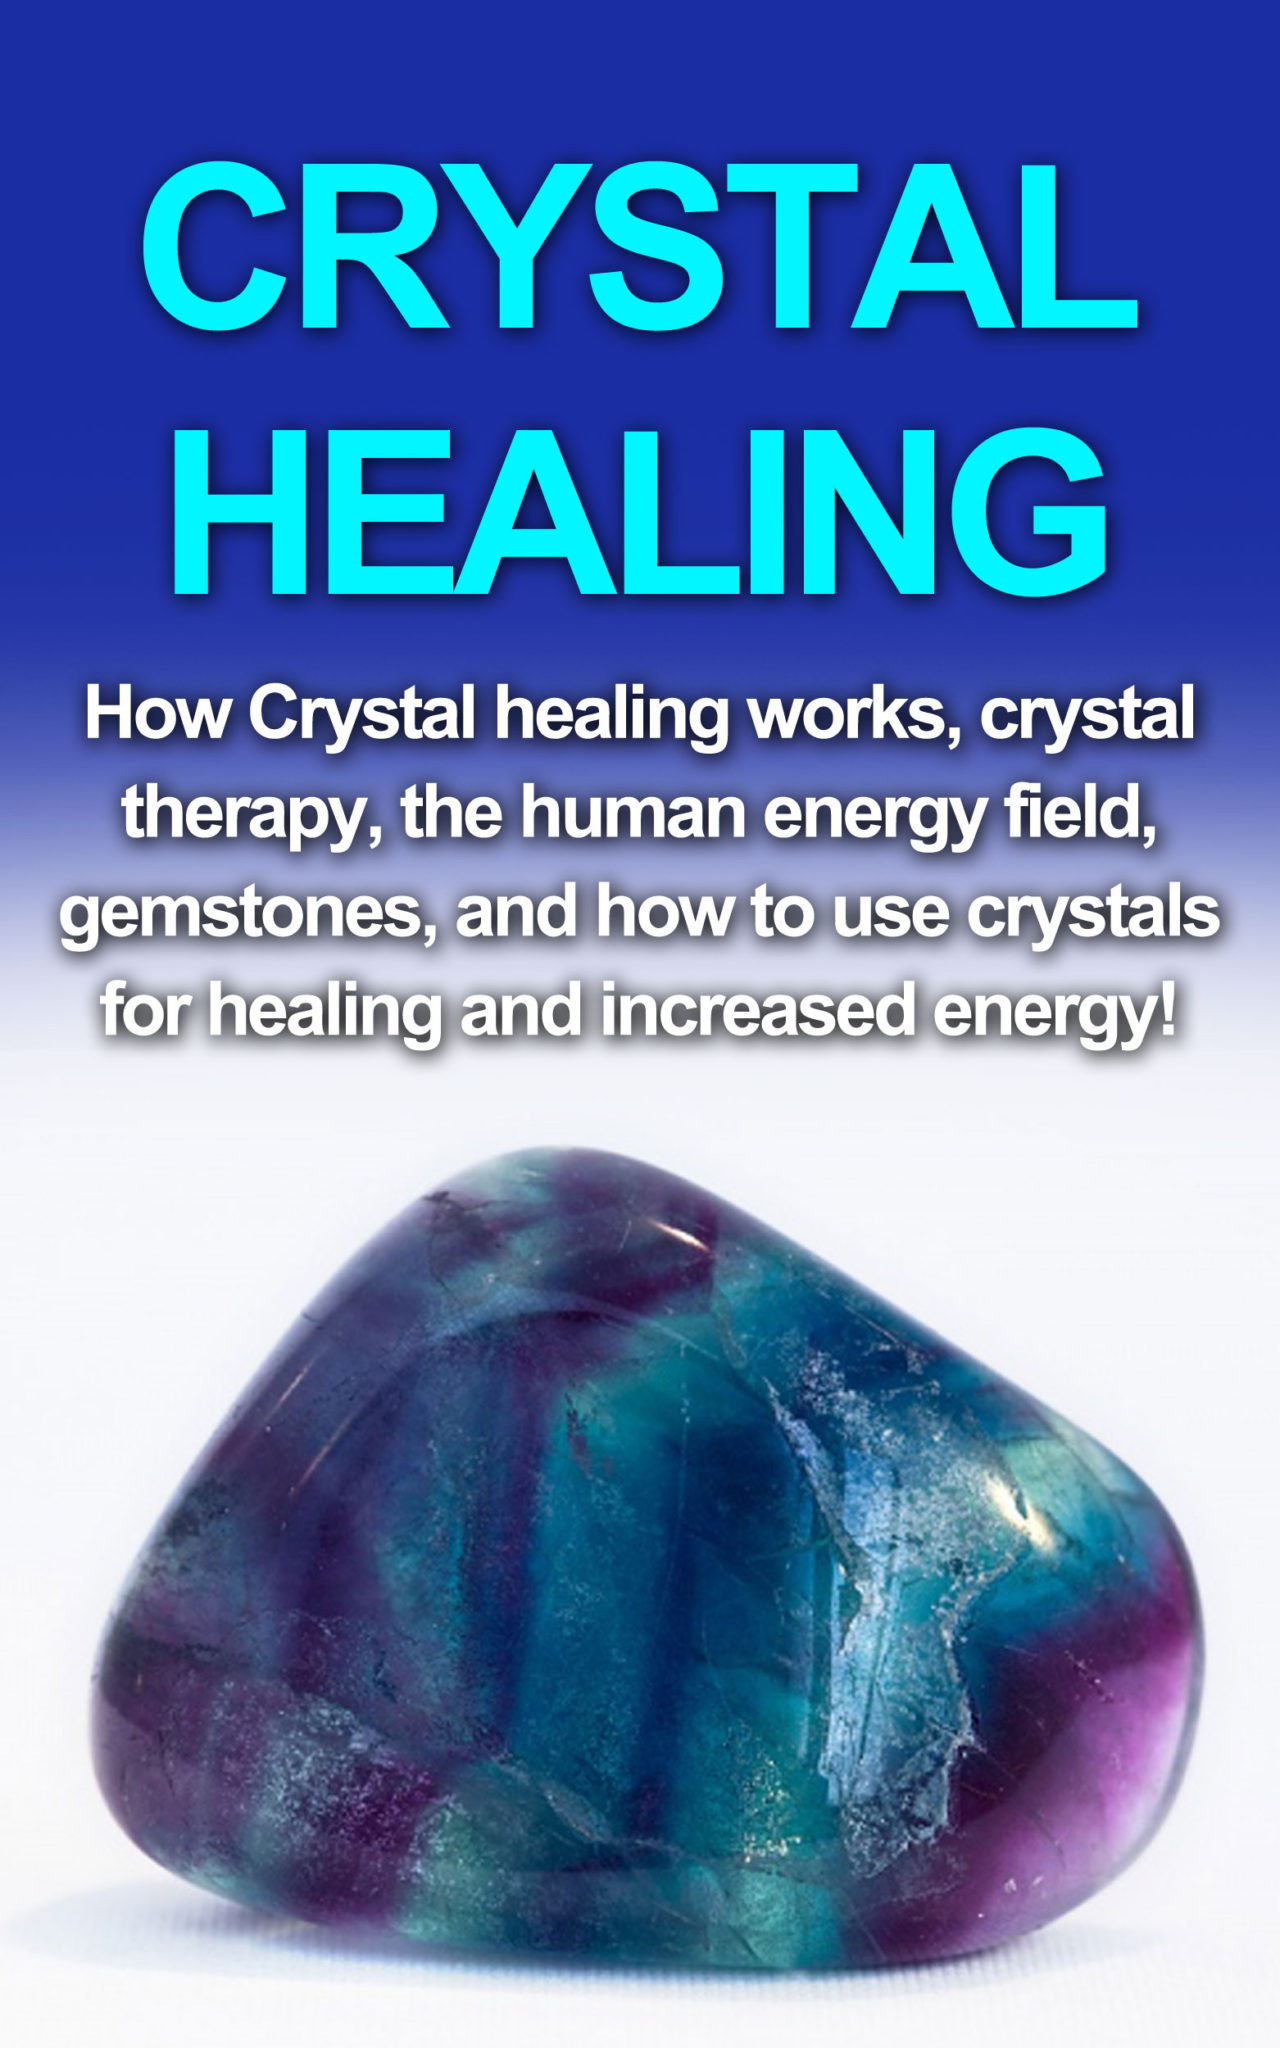 Crystal Healing: How crystal healing works, crystal therapy, the human energy field, gemstones, and how to use crystals for healing and increased energy! by Amber Rainey